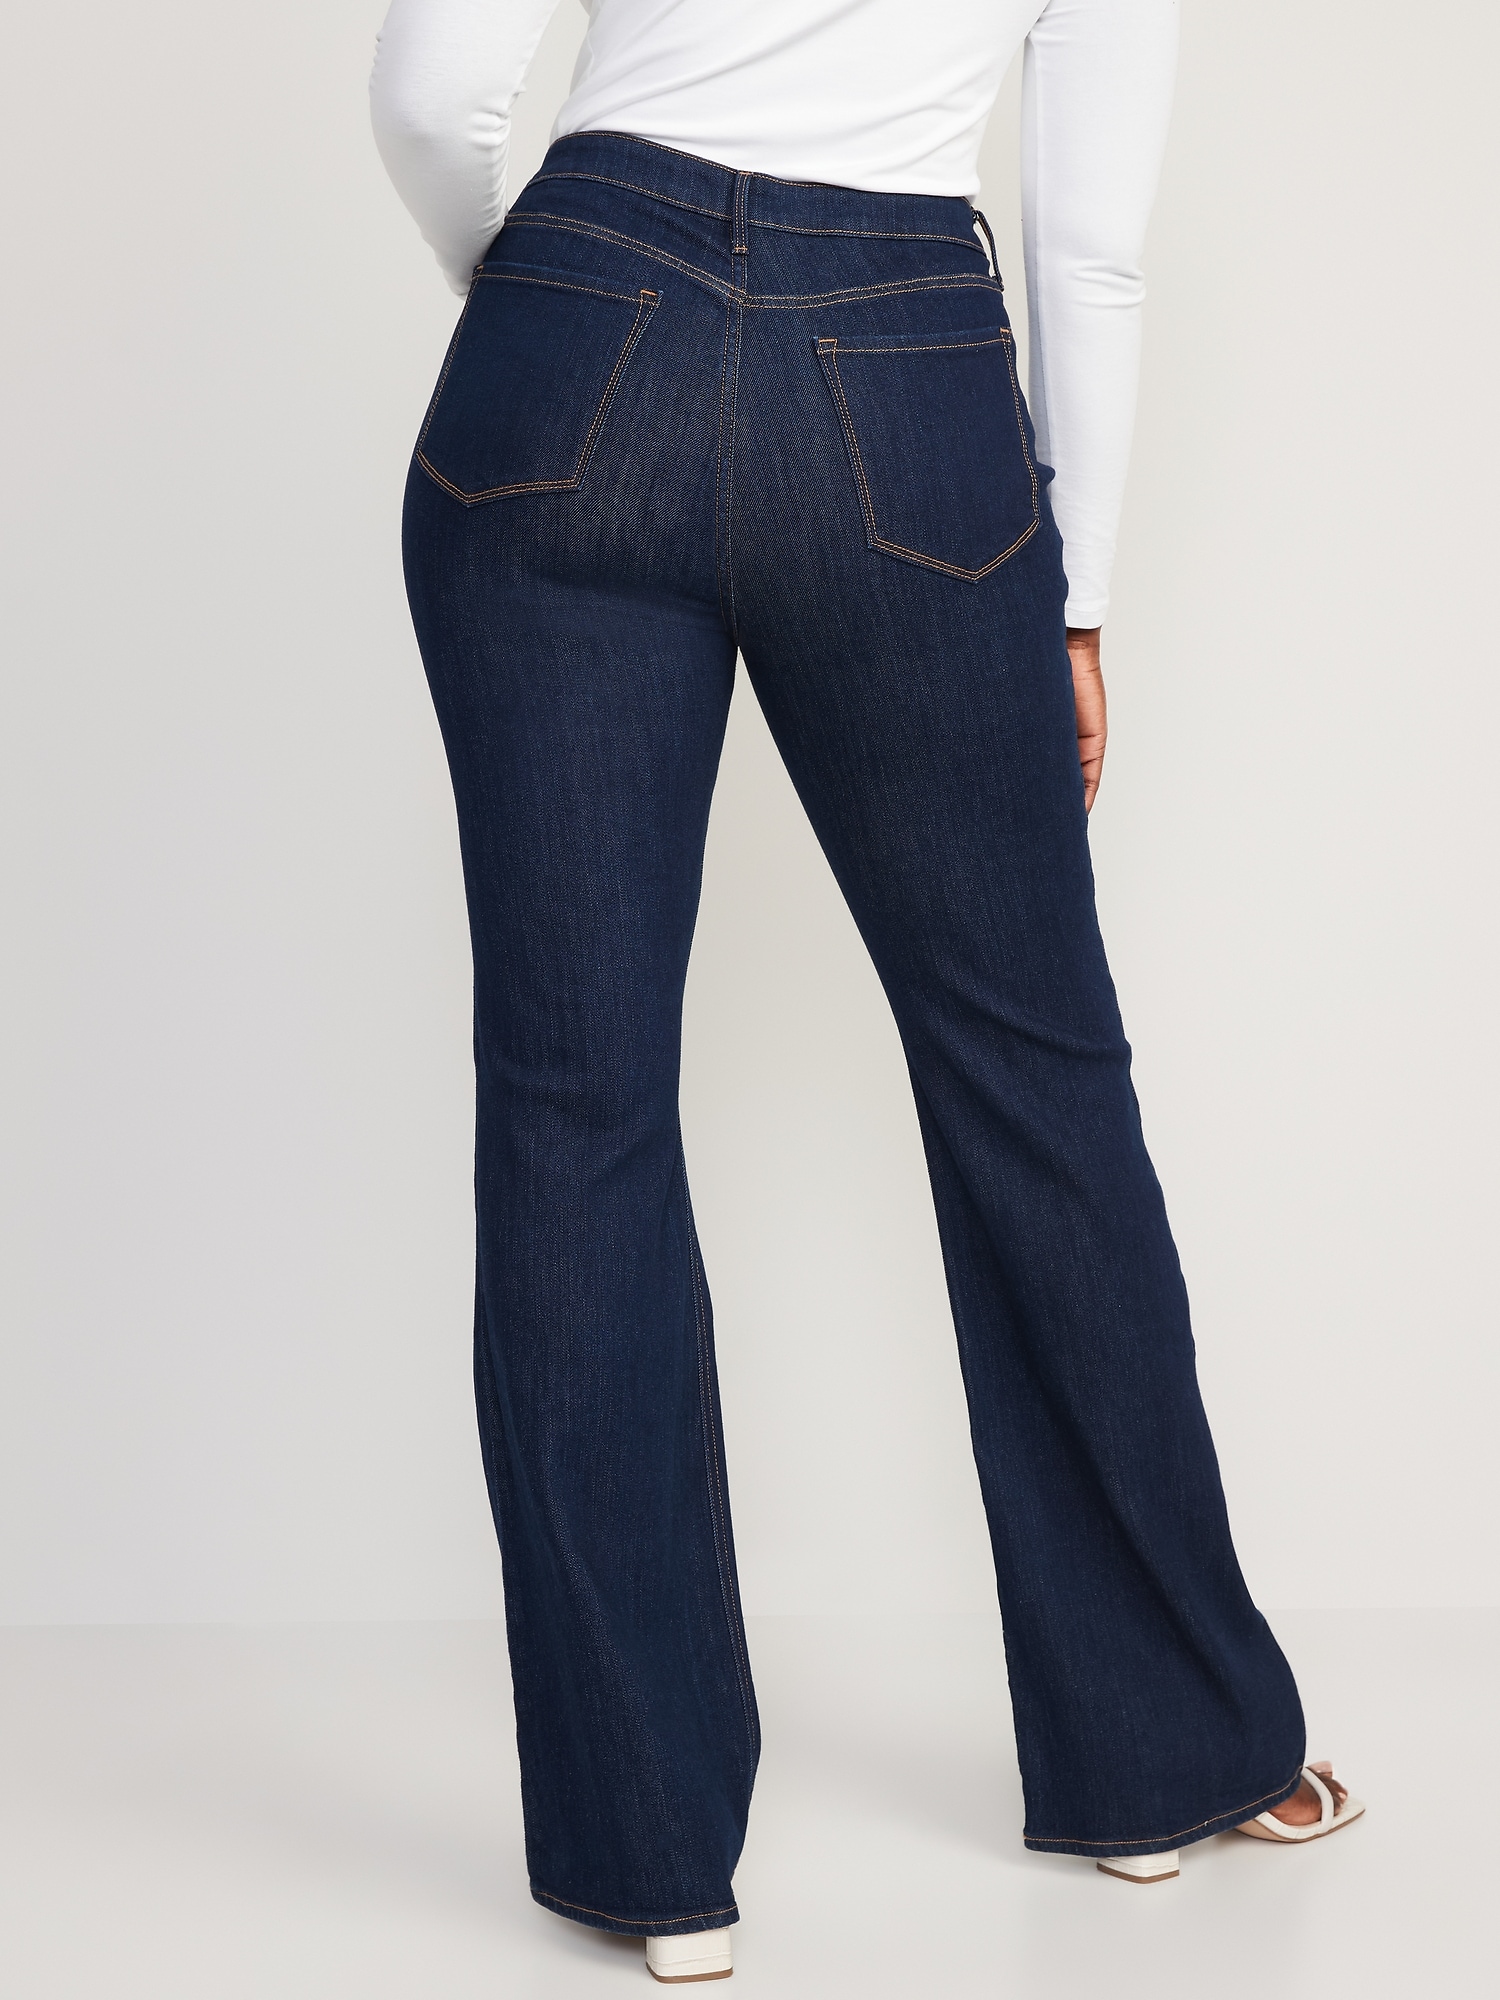 High-Waisted Wow Flare Jeans for Women | Old Navy